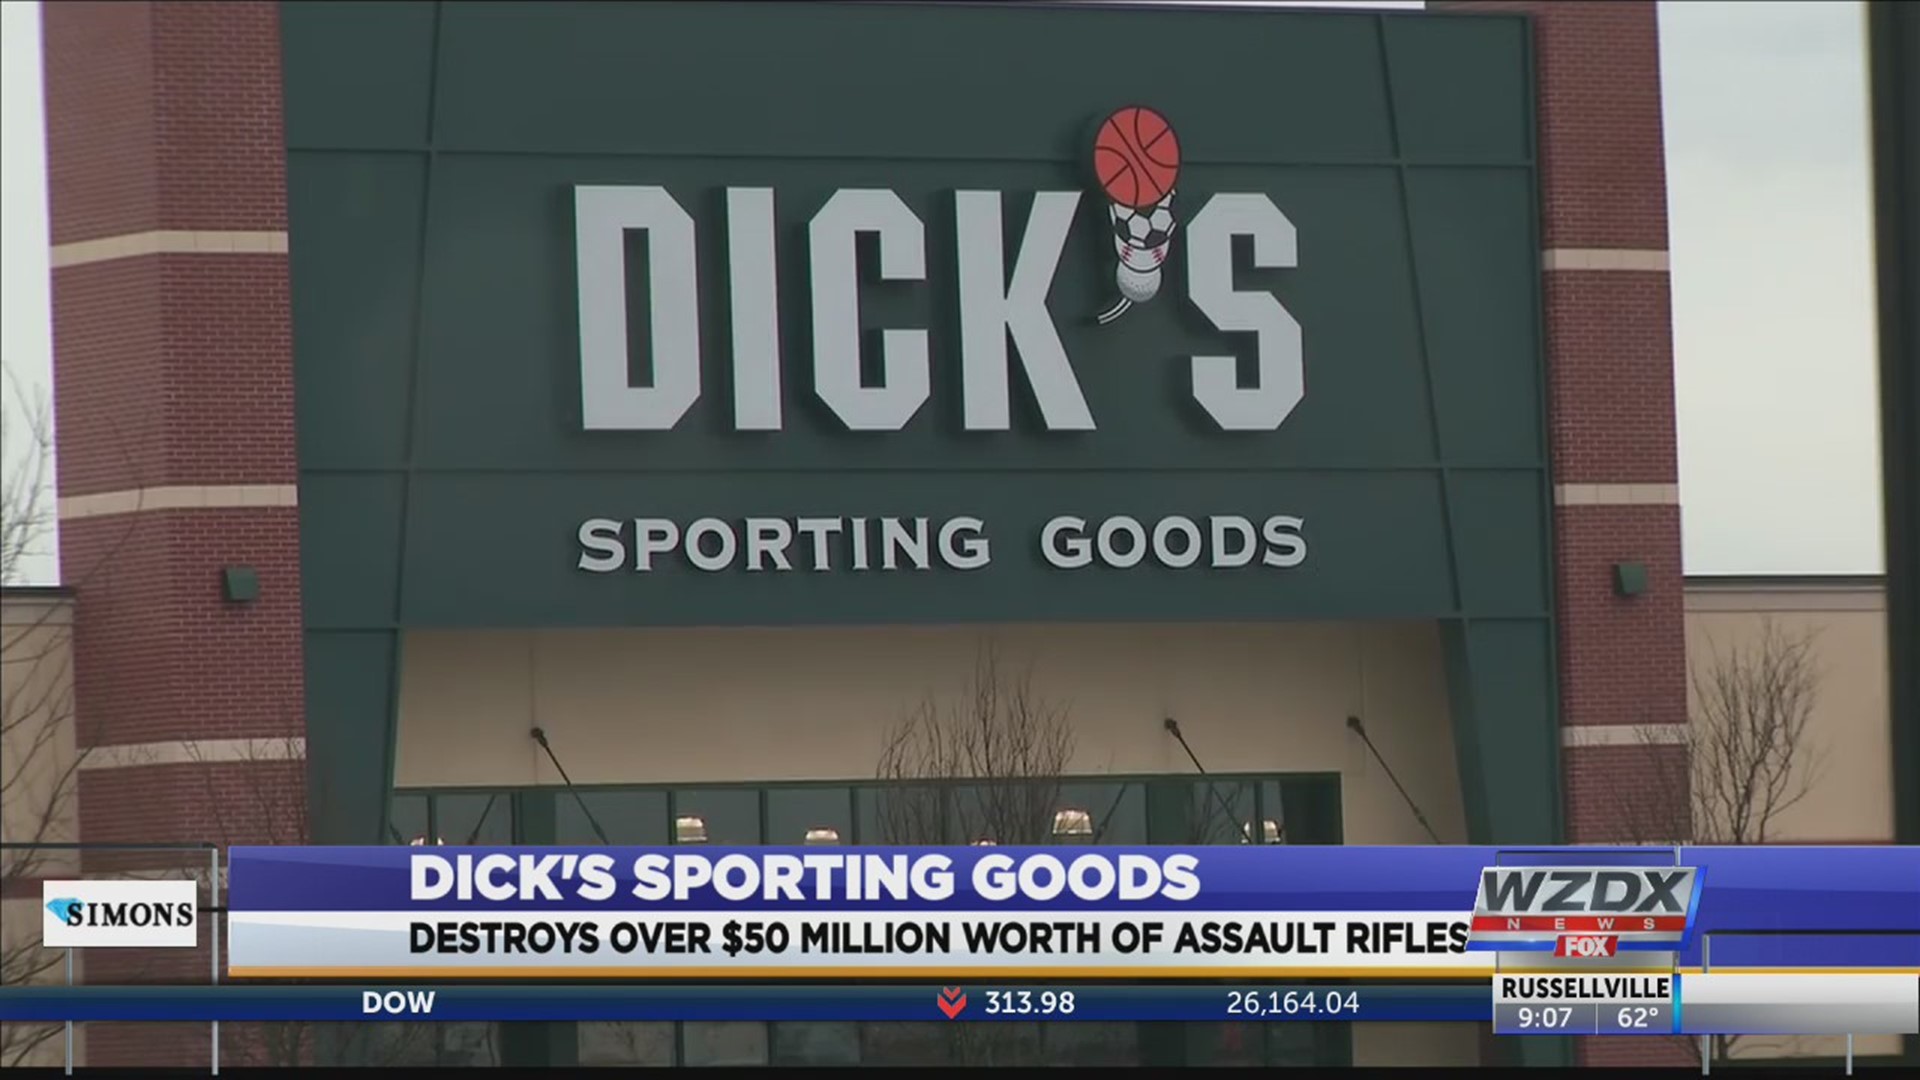 Dick's Sporting Goods has destroyed millions of dollars in assault rifles,